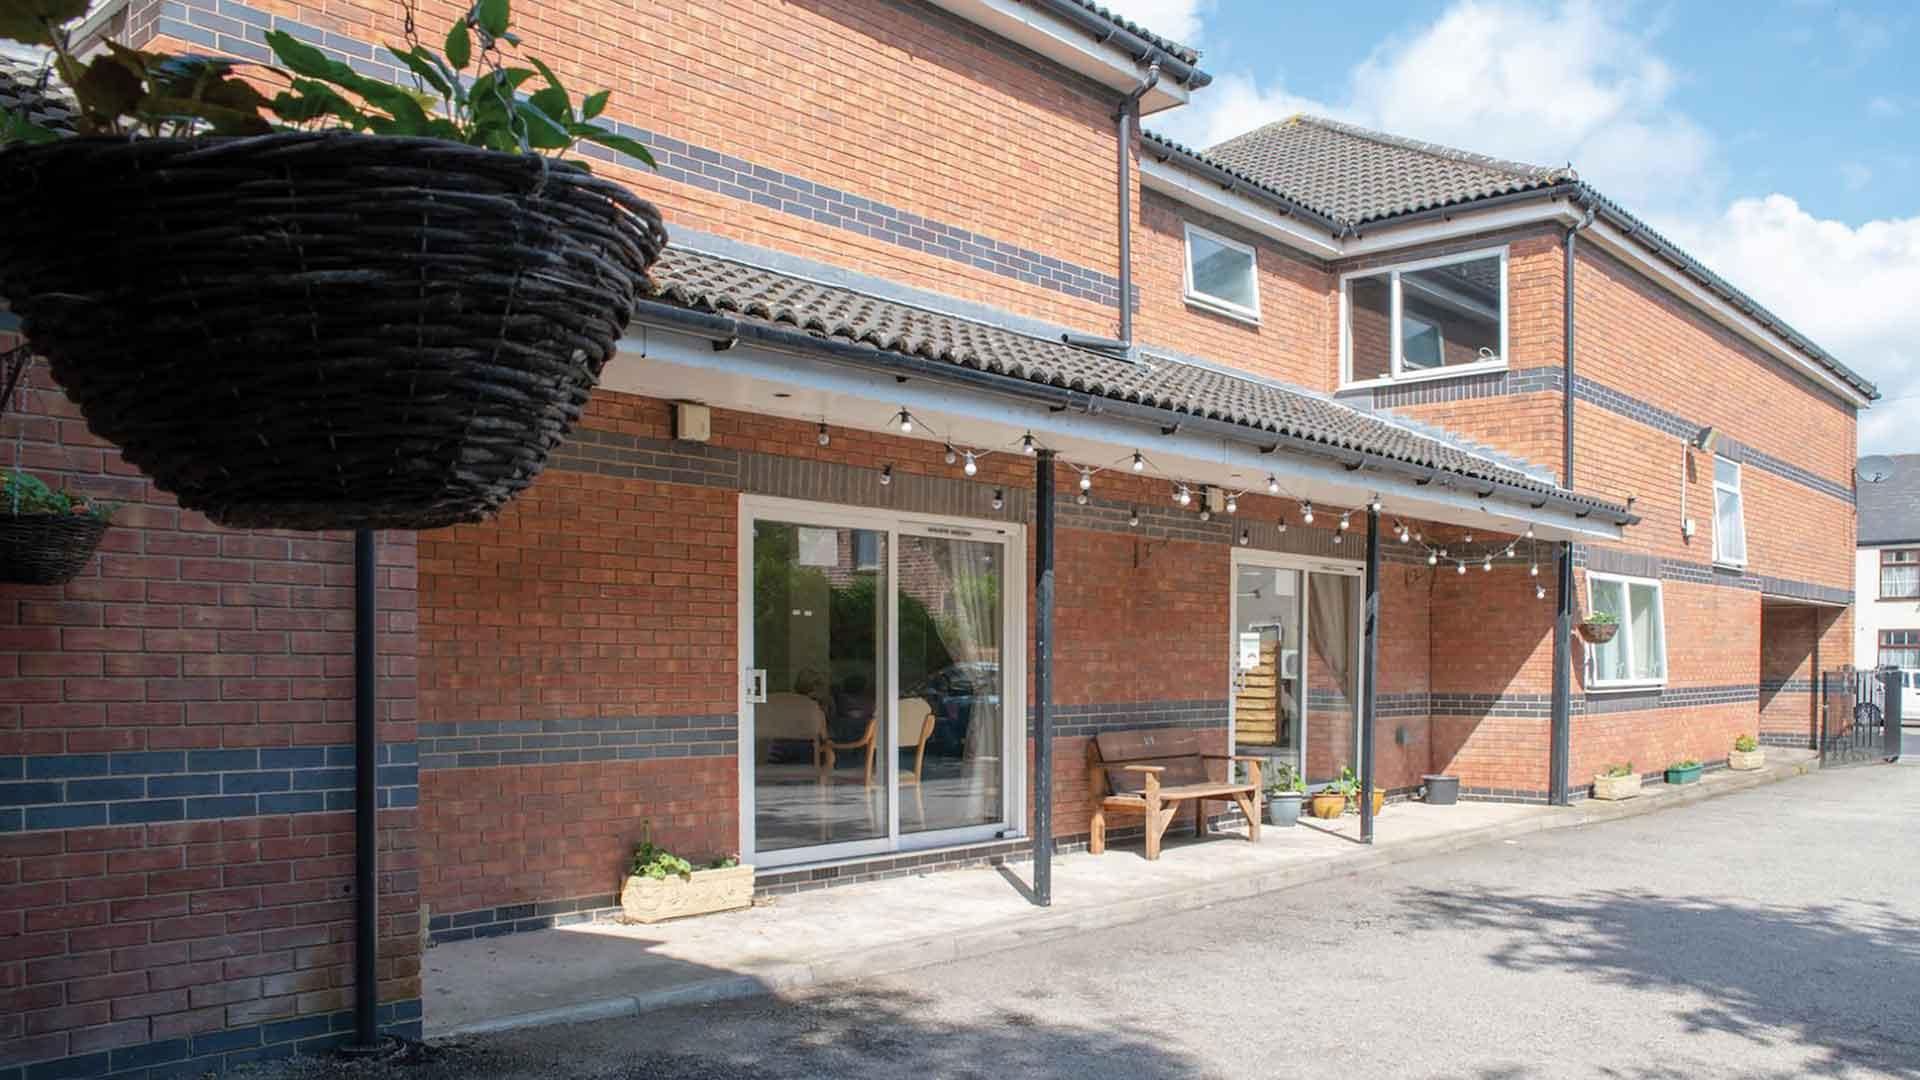 chatsworth lodge care home in chesterfield